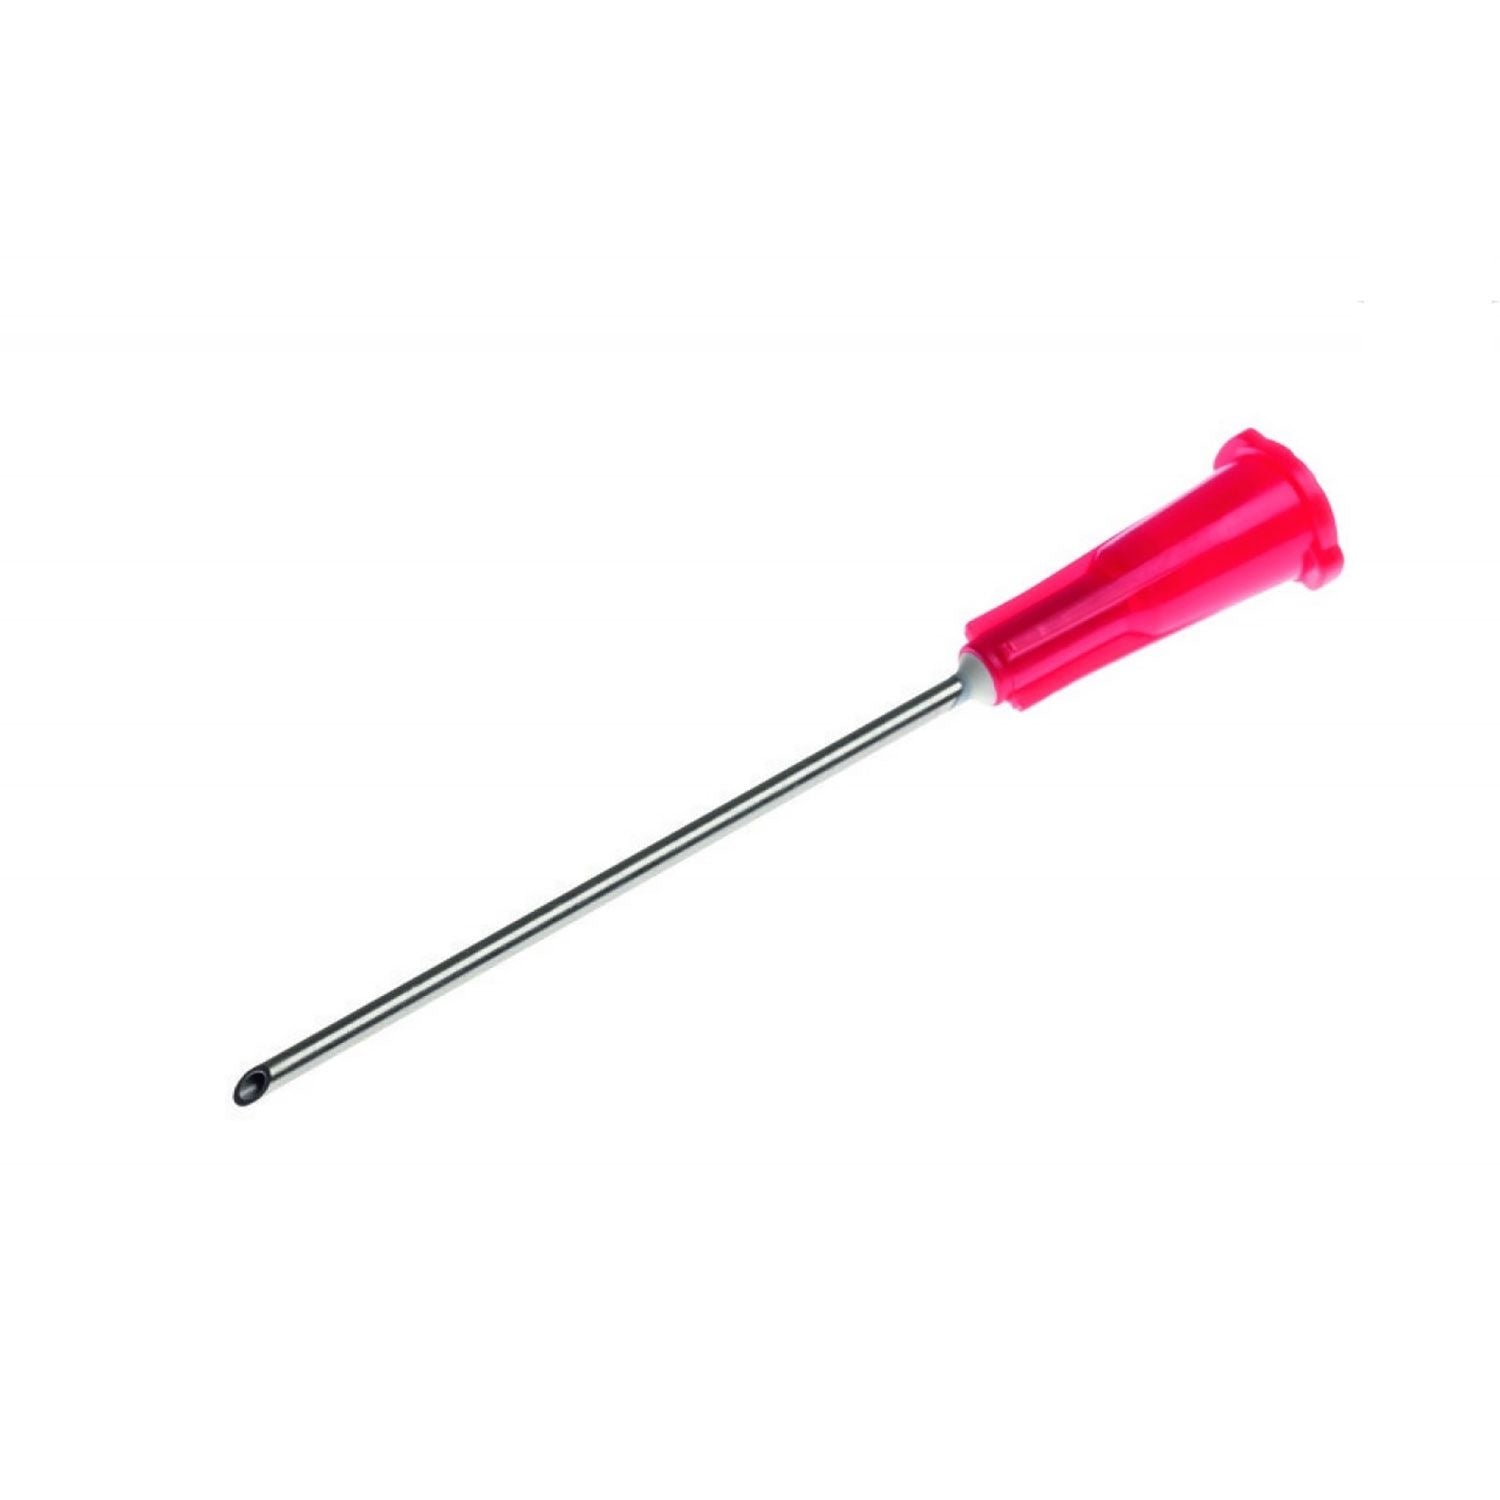 BD Blunt Fill Needle | Red | 18G x 1.5" | Pack of 100